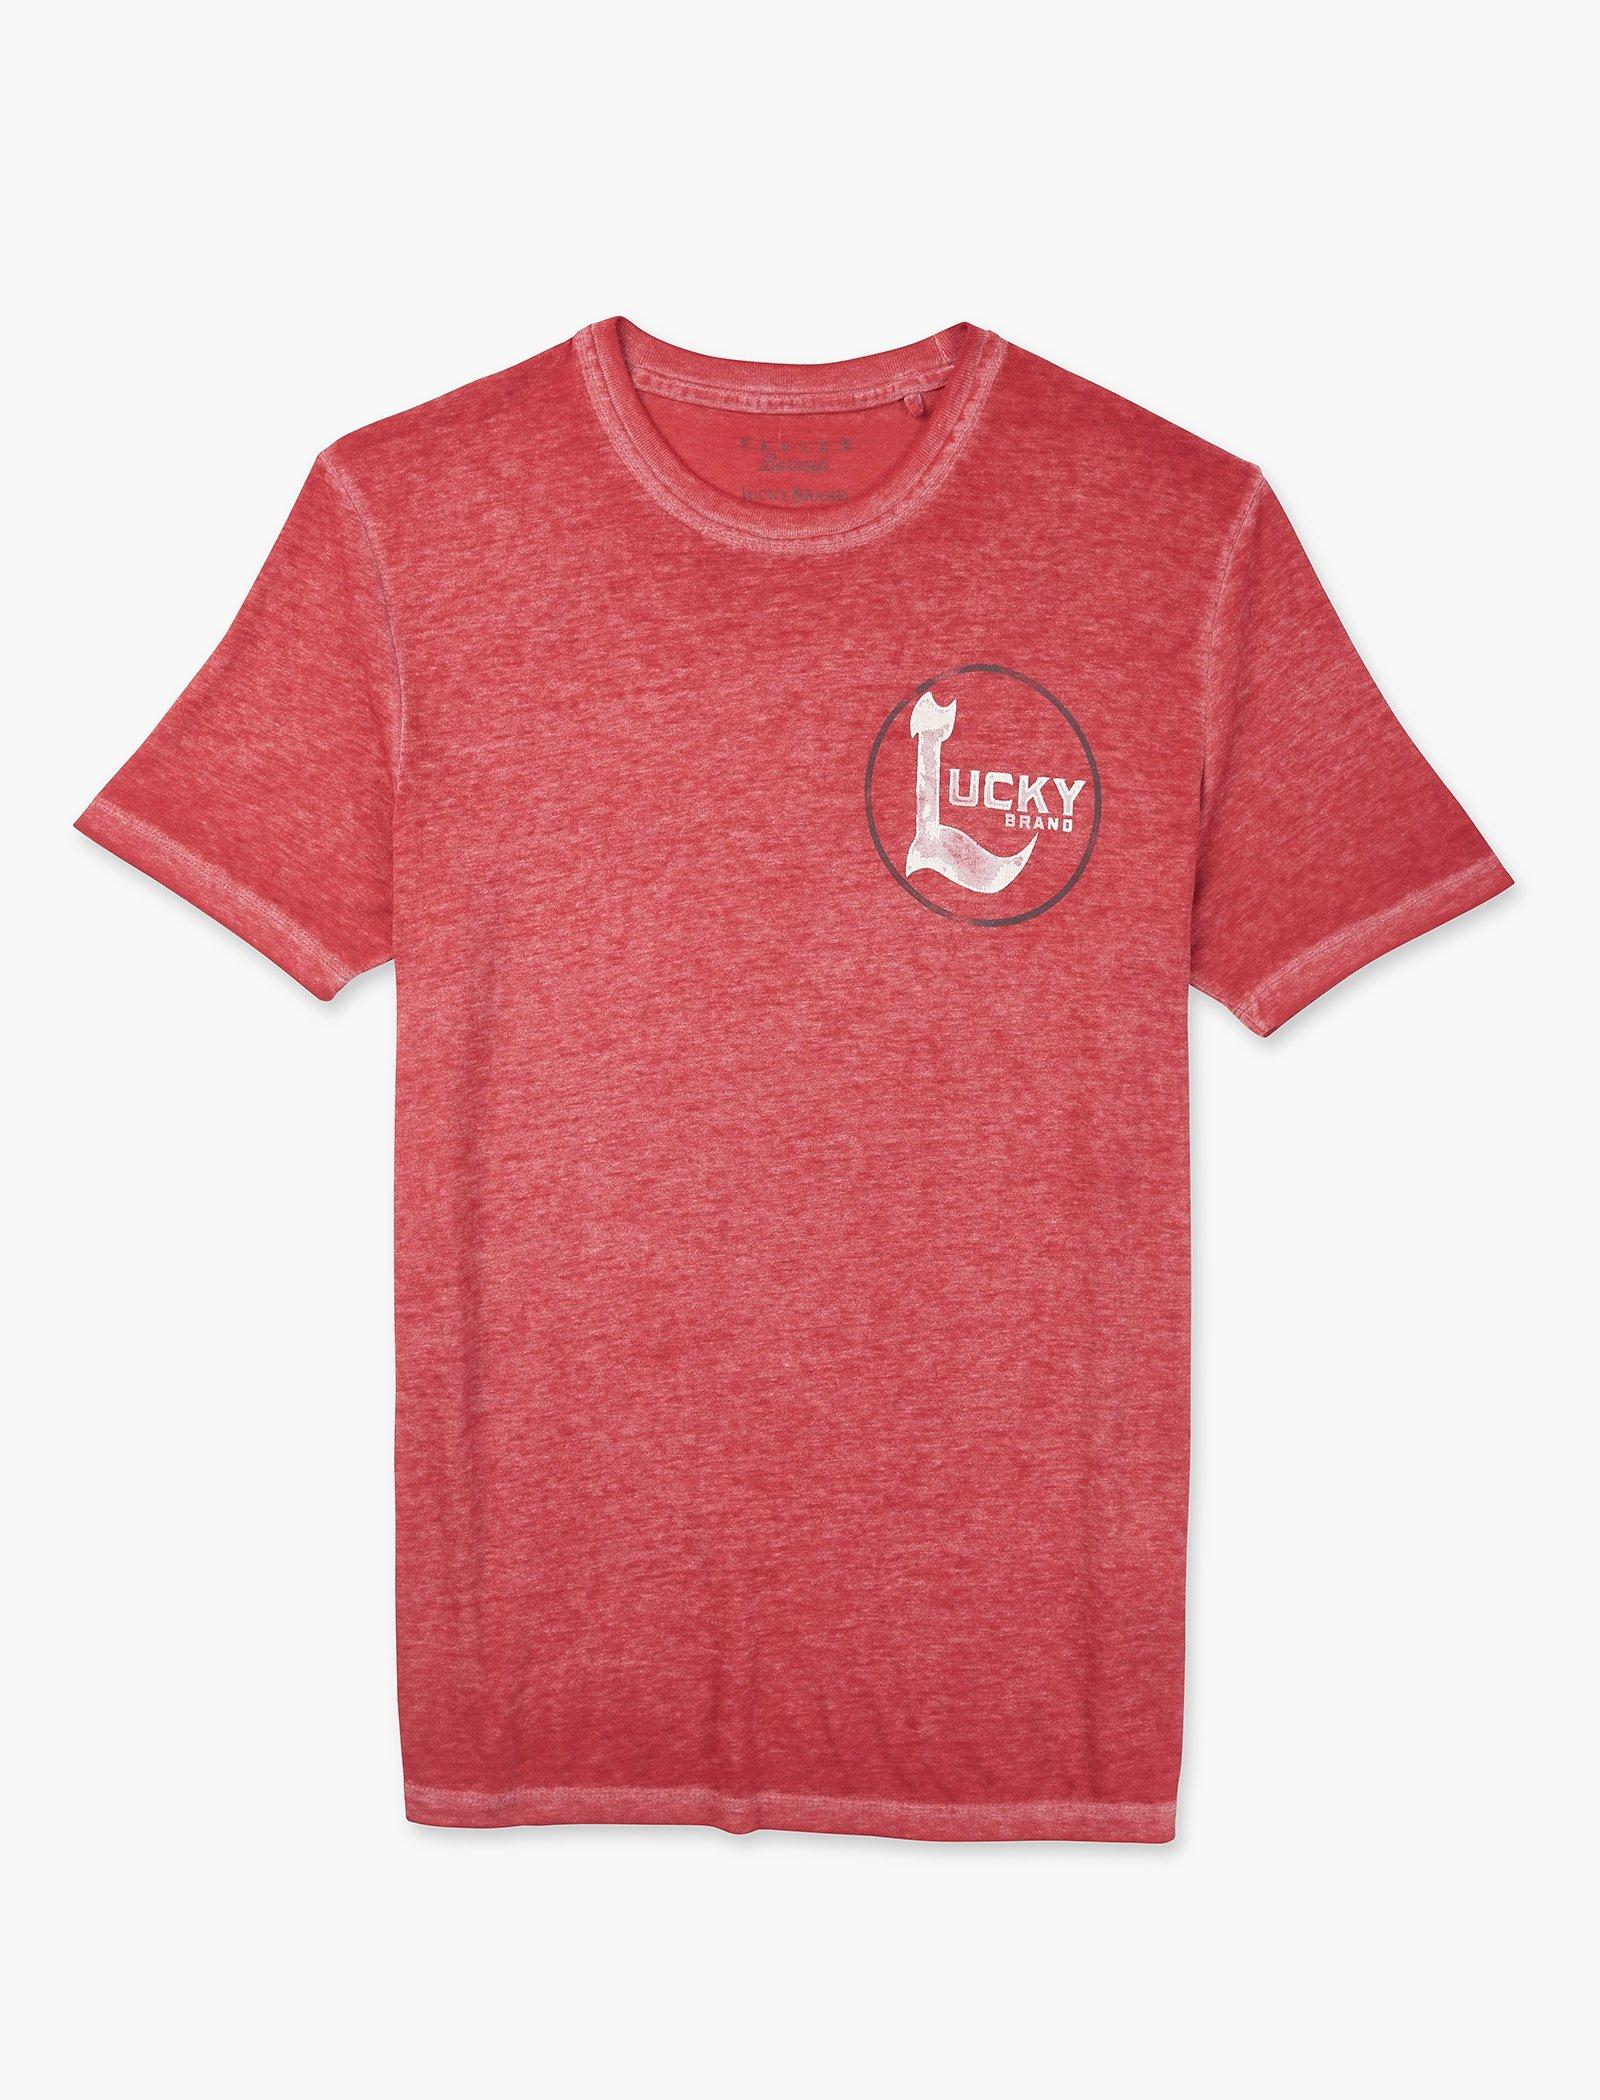 Graphic Tees Shop | Buy One, Get One 50% Off Reg. Apparel | Lucky Brand